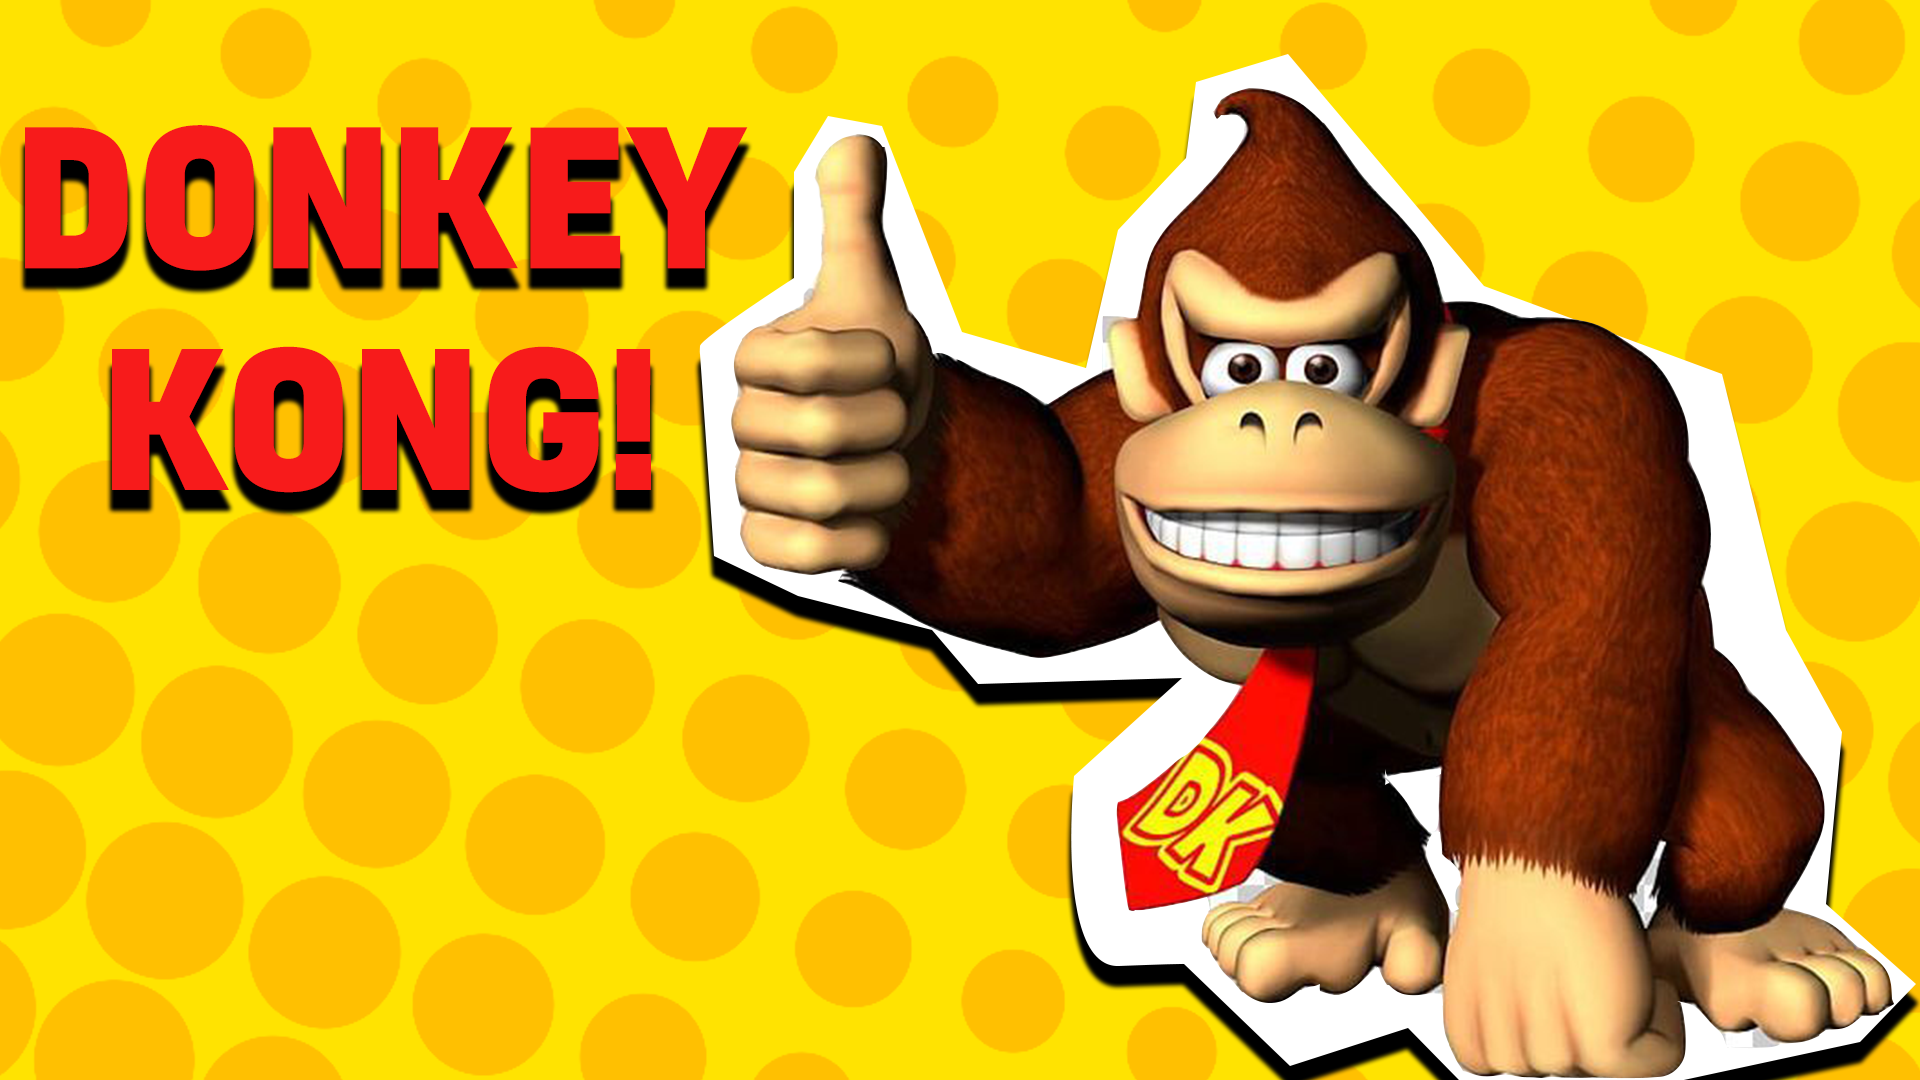 You're Donkey Kong! You've got the power and strength of a giant cartoon gorilla! You also love wearing ties. 